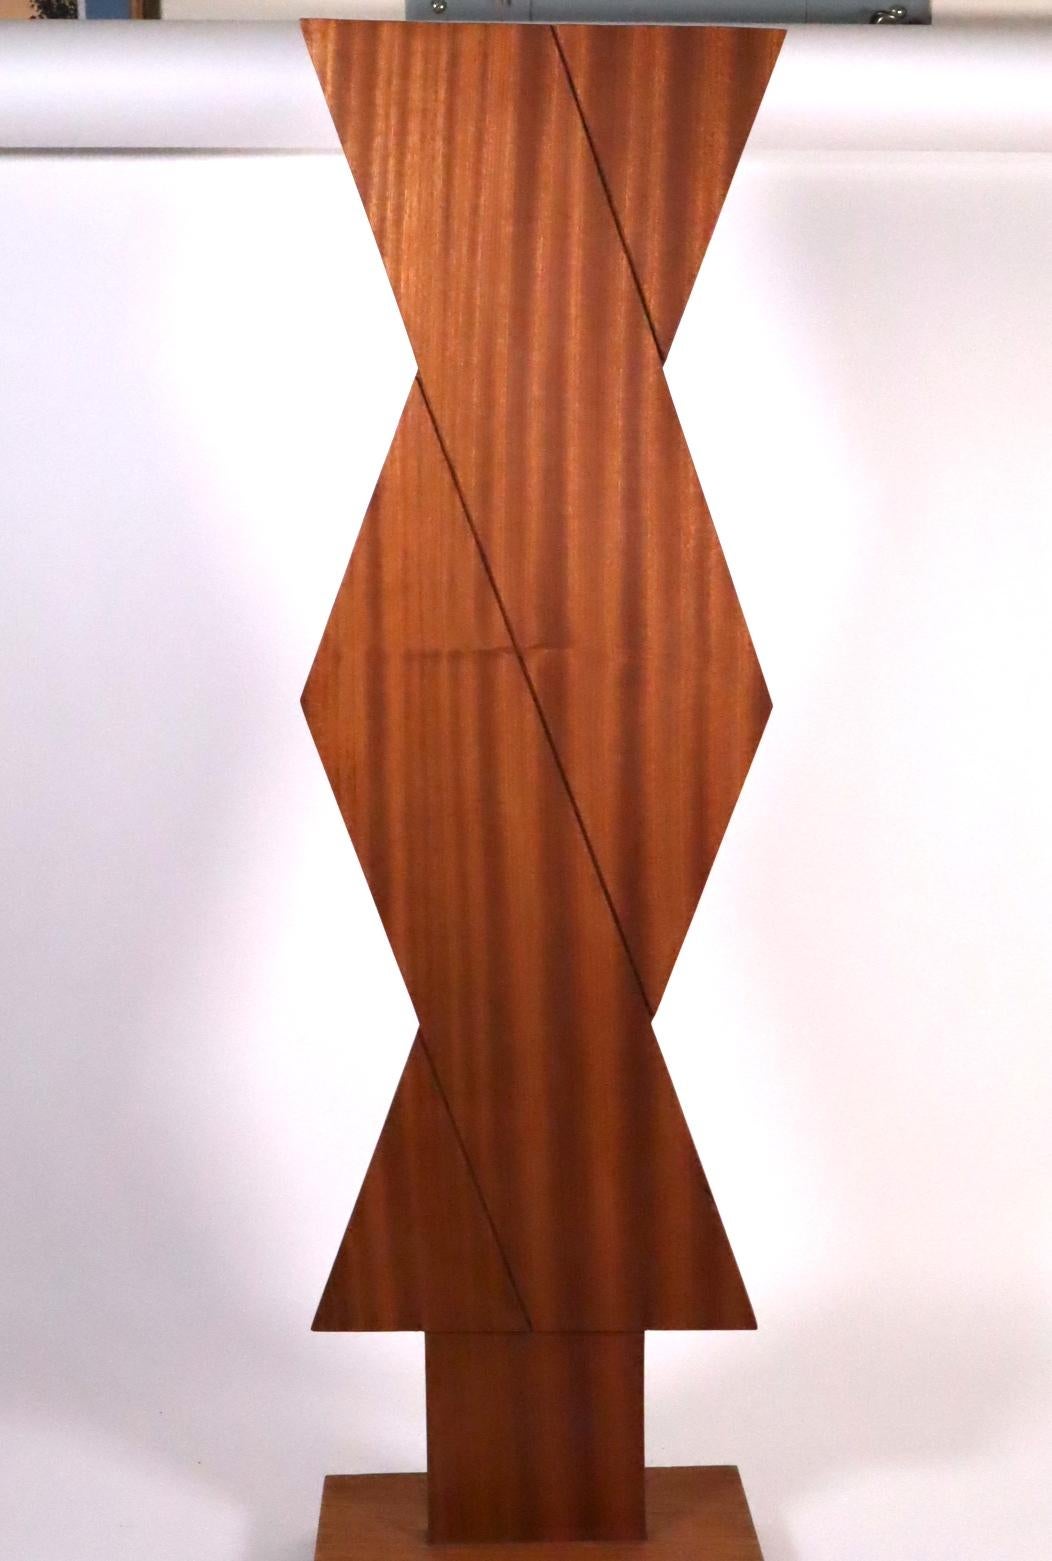 Wood Sculpture 1971 abstract geometric illusion INVENTORY CLEARANCE SALE For Sale 1